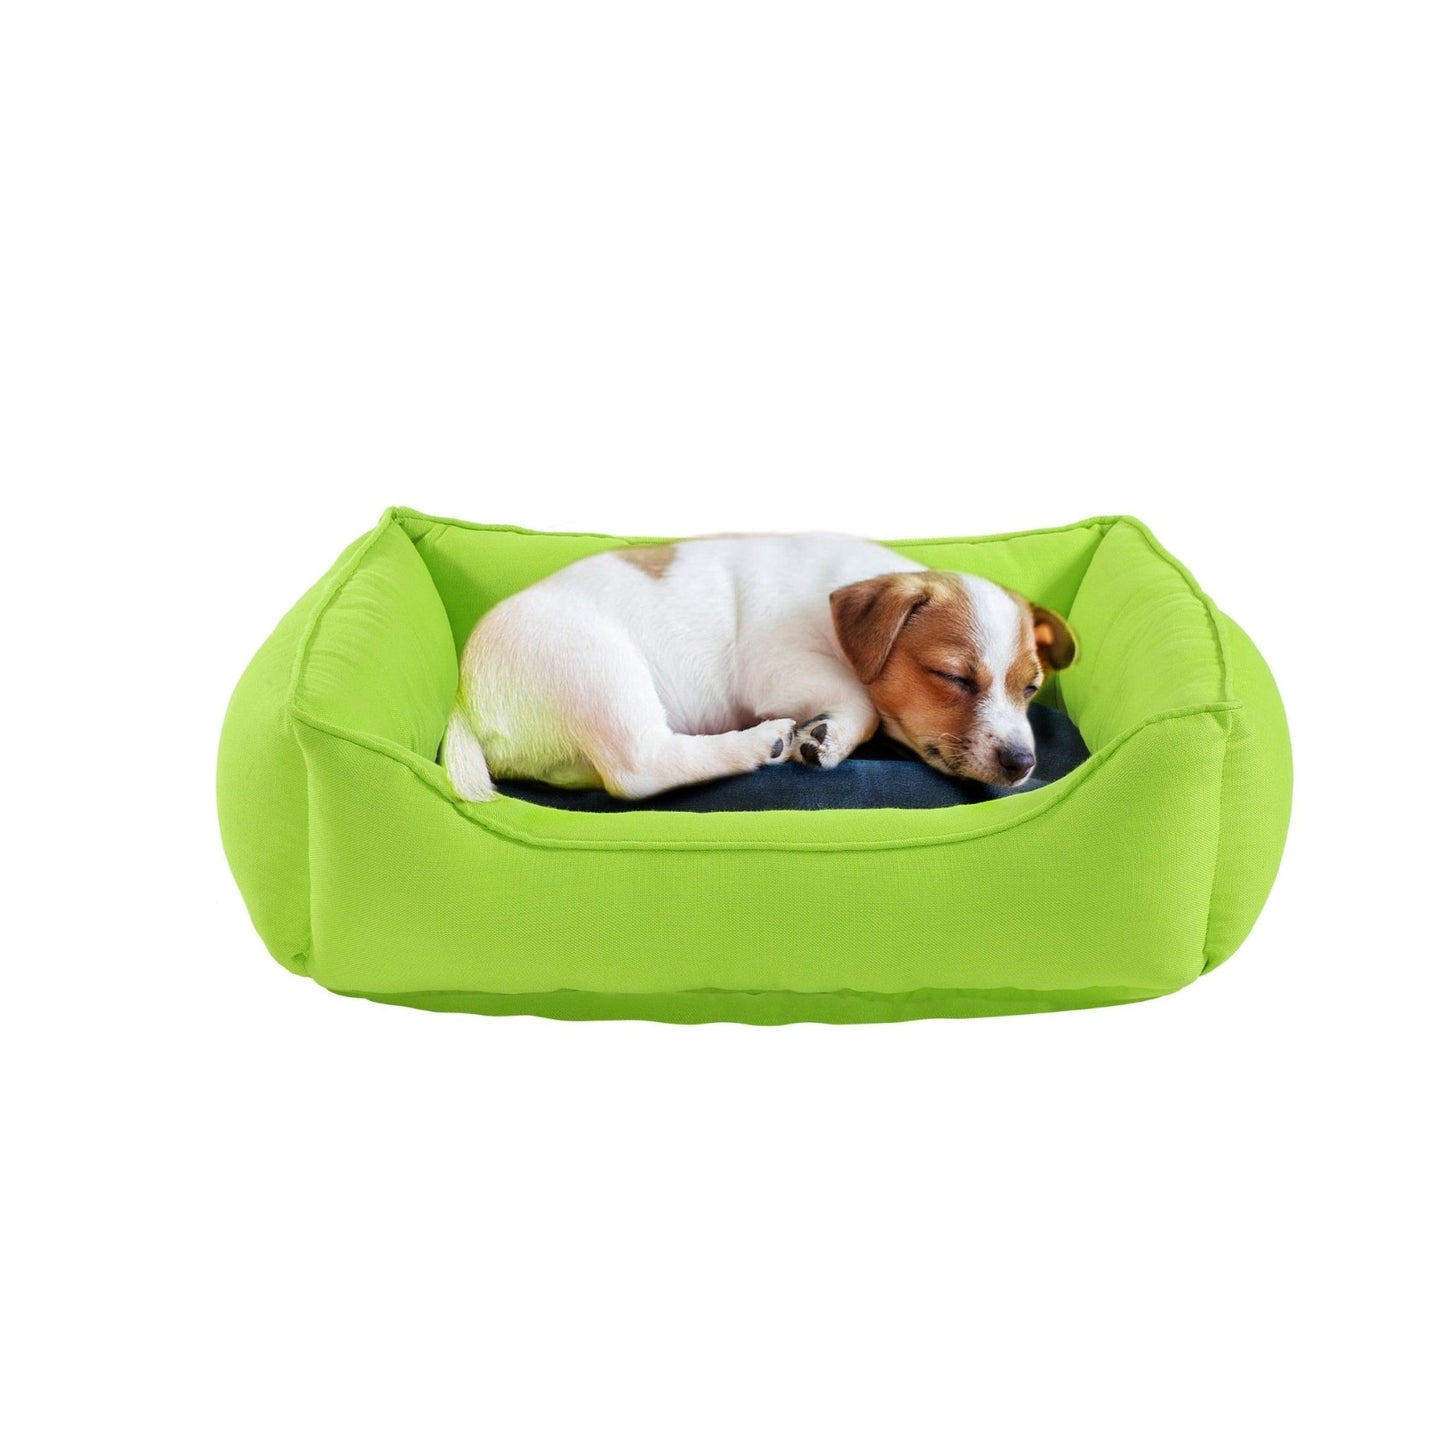 Dog Pet Bed For Small Medium Large Dog Puppy Warm Cushion Calming Cat Washable Beds - Arlinens